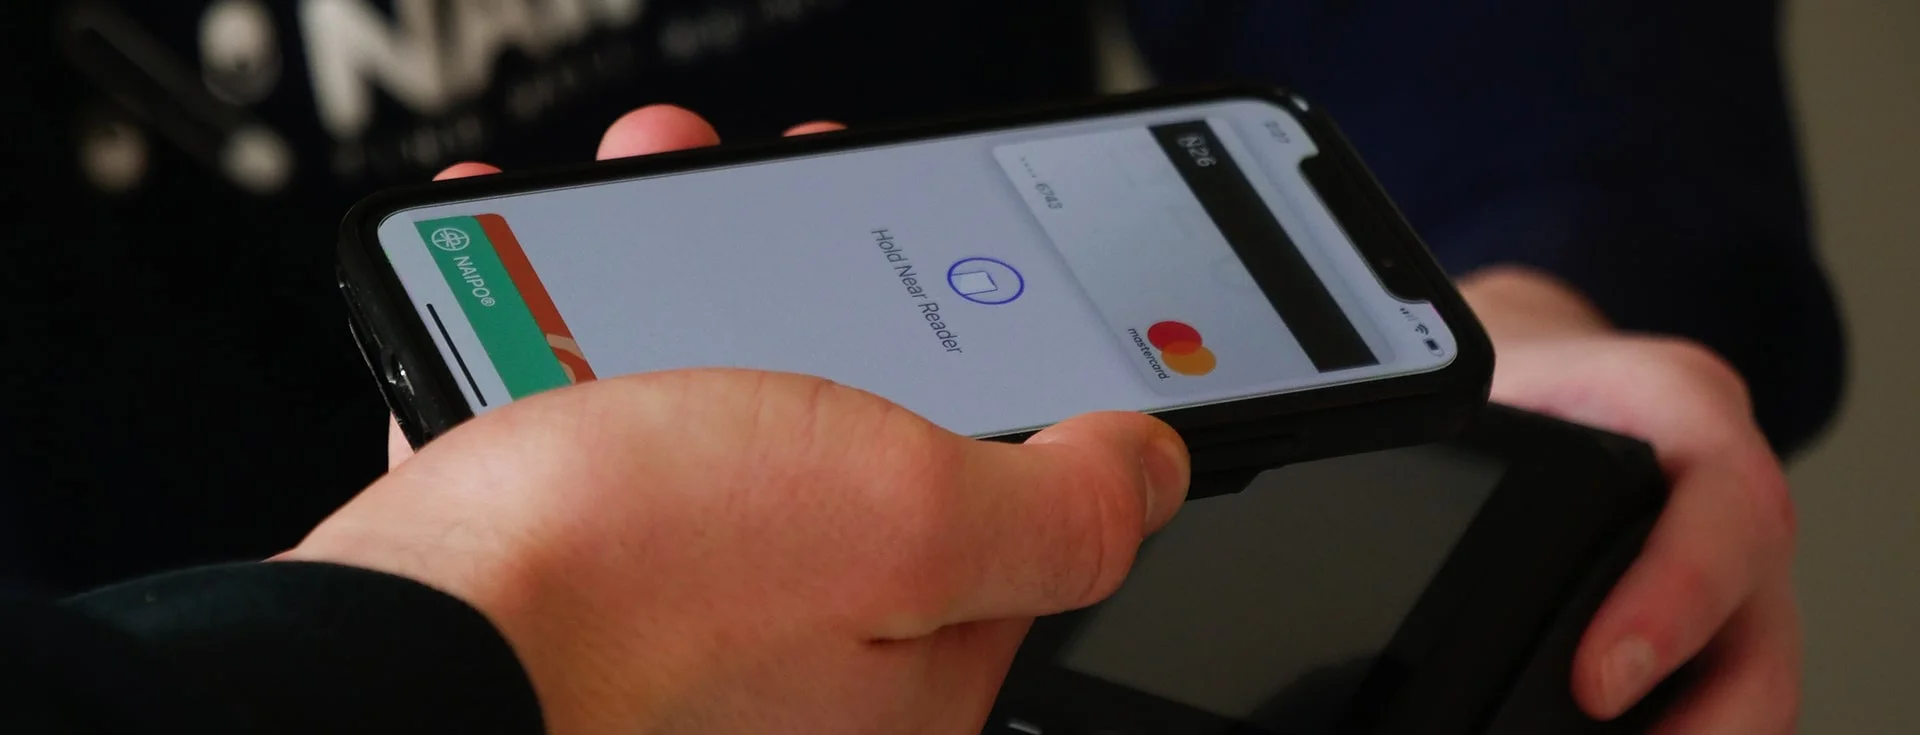 Apple Pay Later Now Available on Limited Basis, Launching Widely Soon